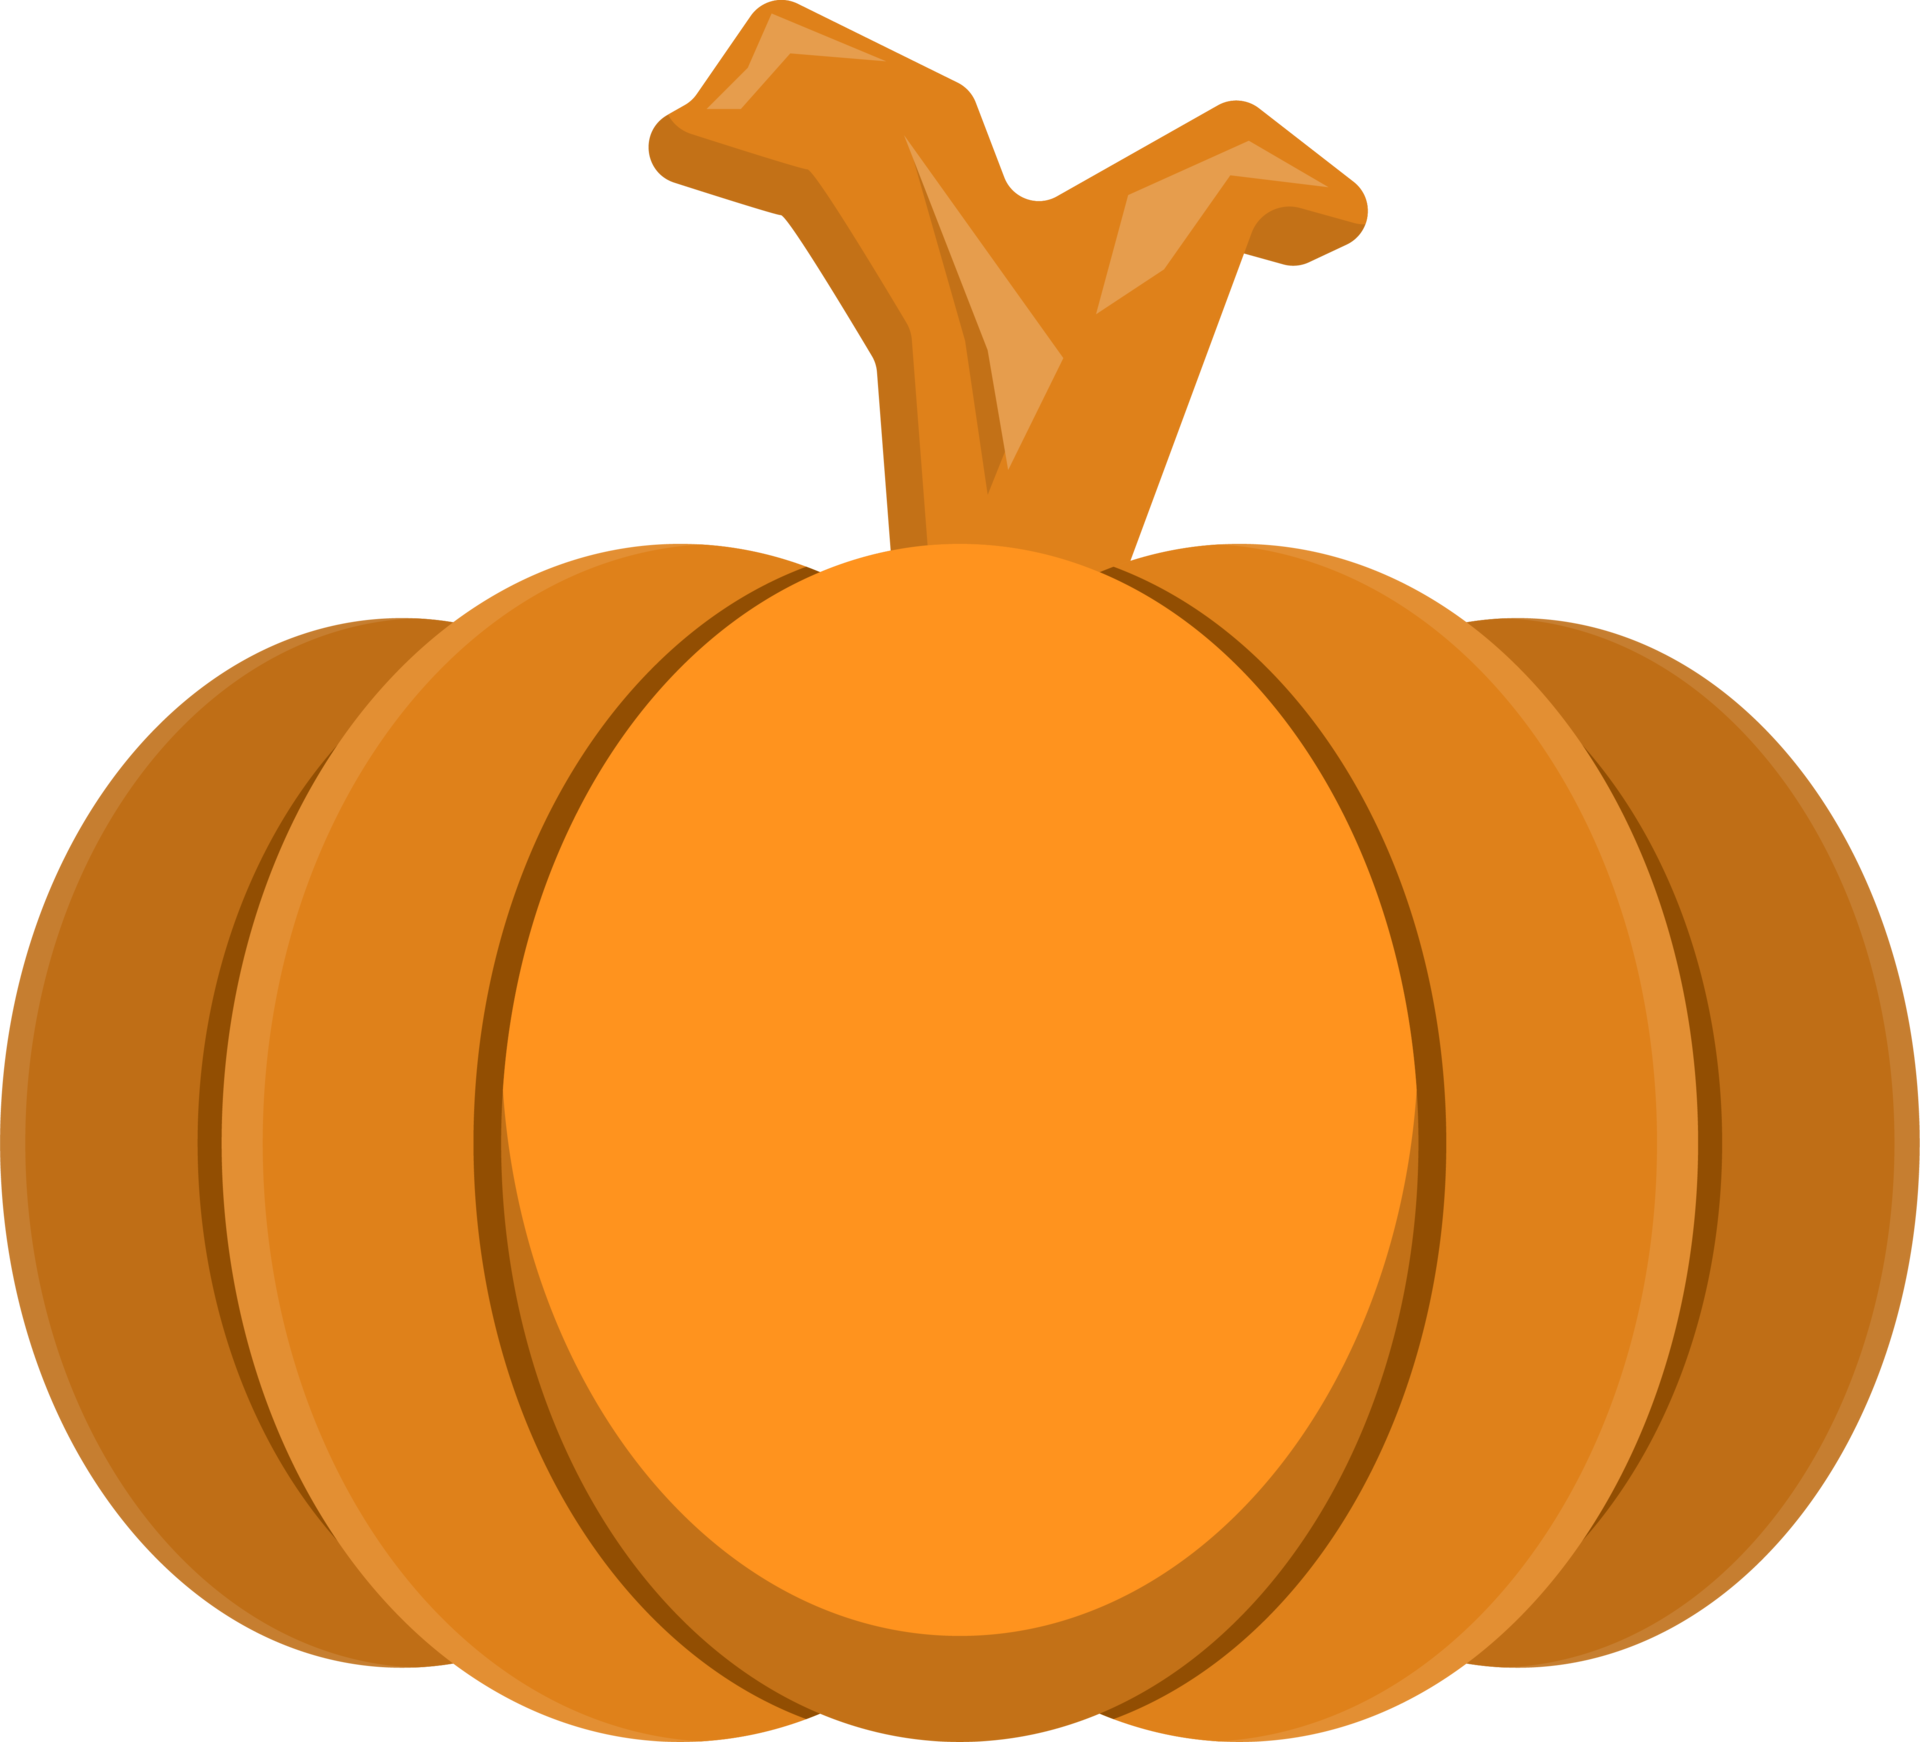 Free Orange Ghost Cartoon Pumpkin. Transparent background for decorative  use. Ghosting at Halloween Festival. scary smile 11654863 PNG with  Transparent Background